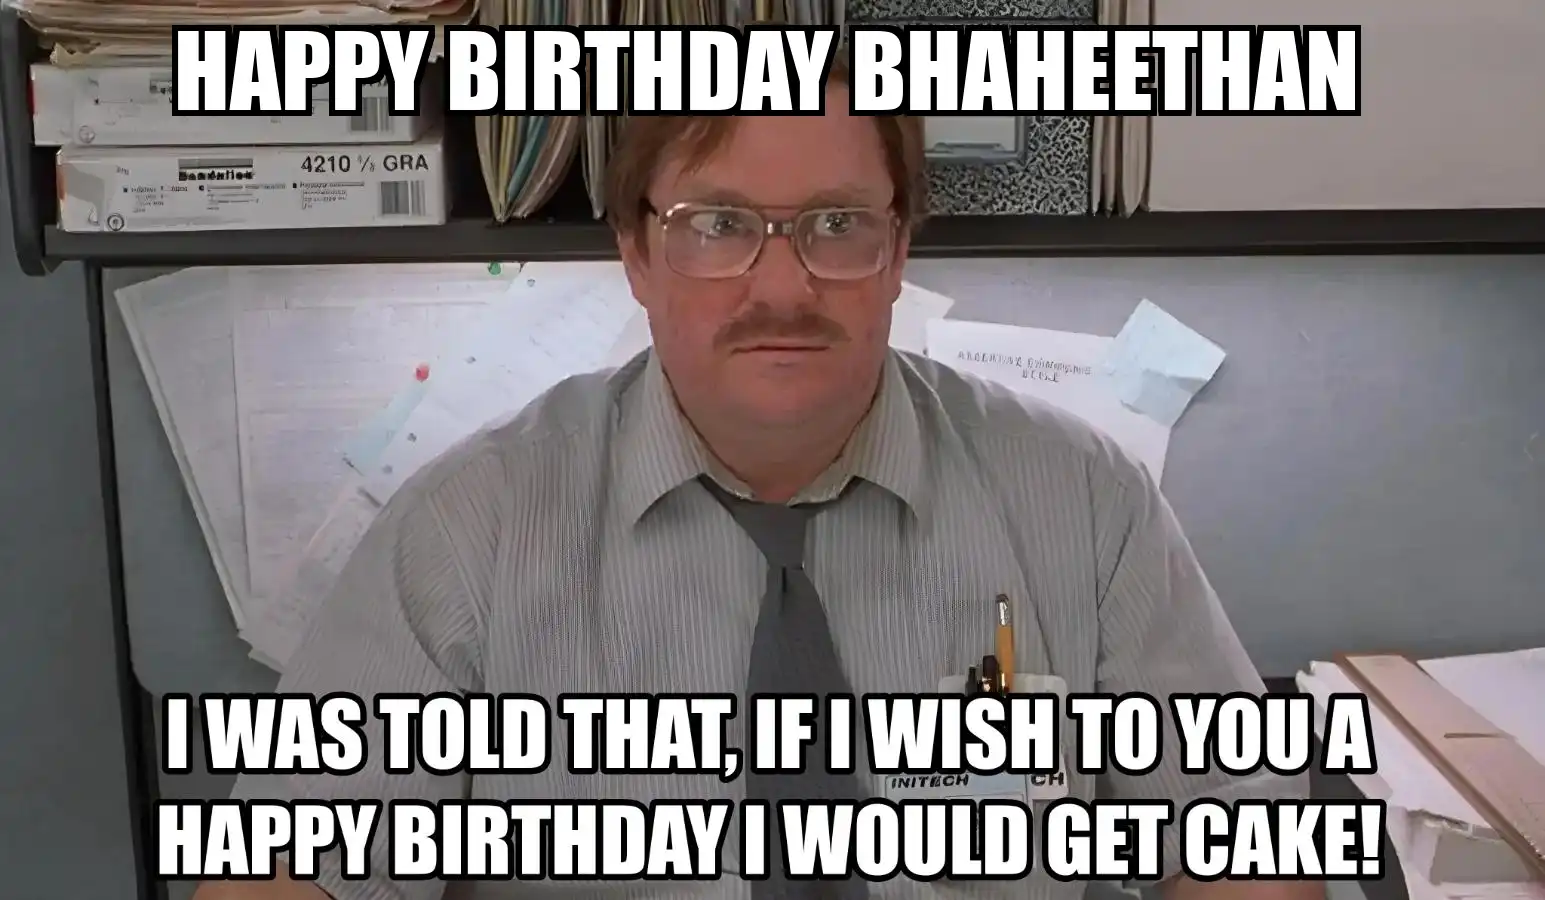 Happy Birthday Bhaheethan I Would Get A Cake Meme